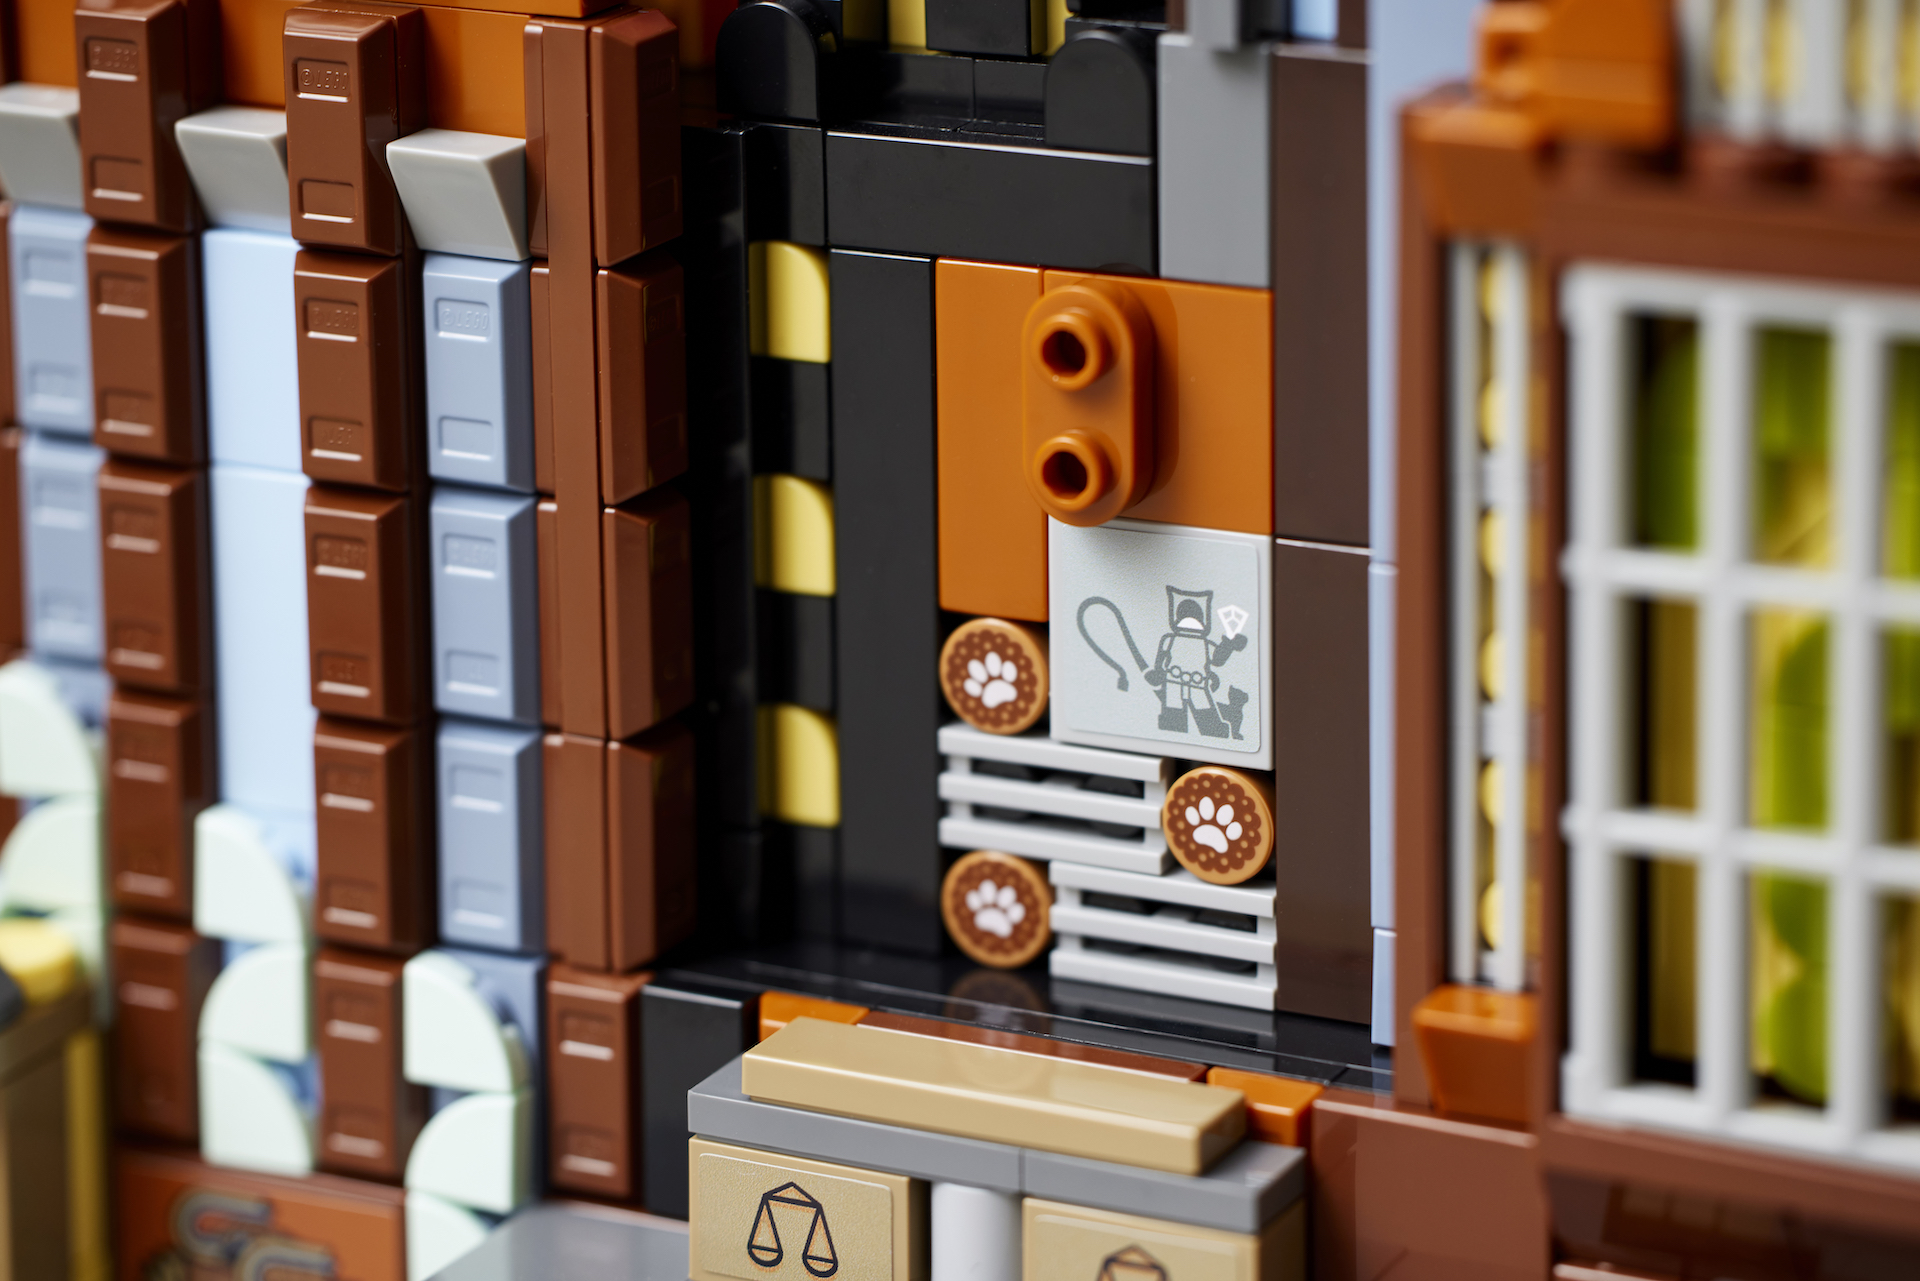 LEGO 76271 Batman: The Animated Series Gotham City visual tour and gallery